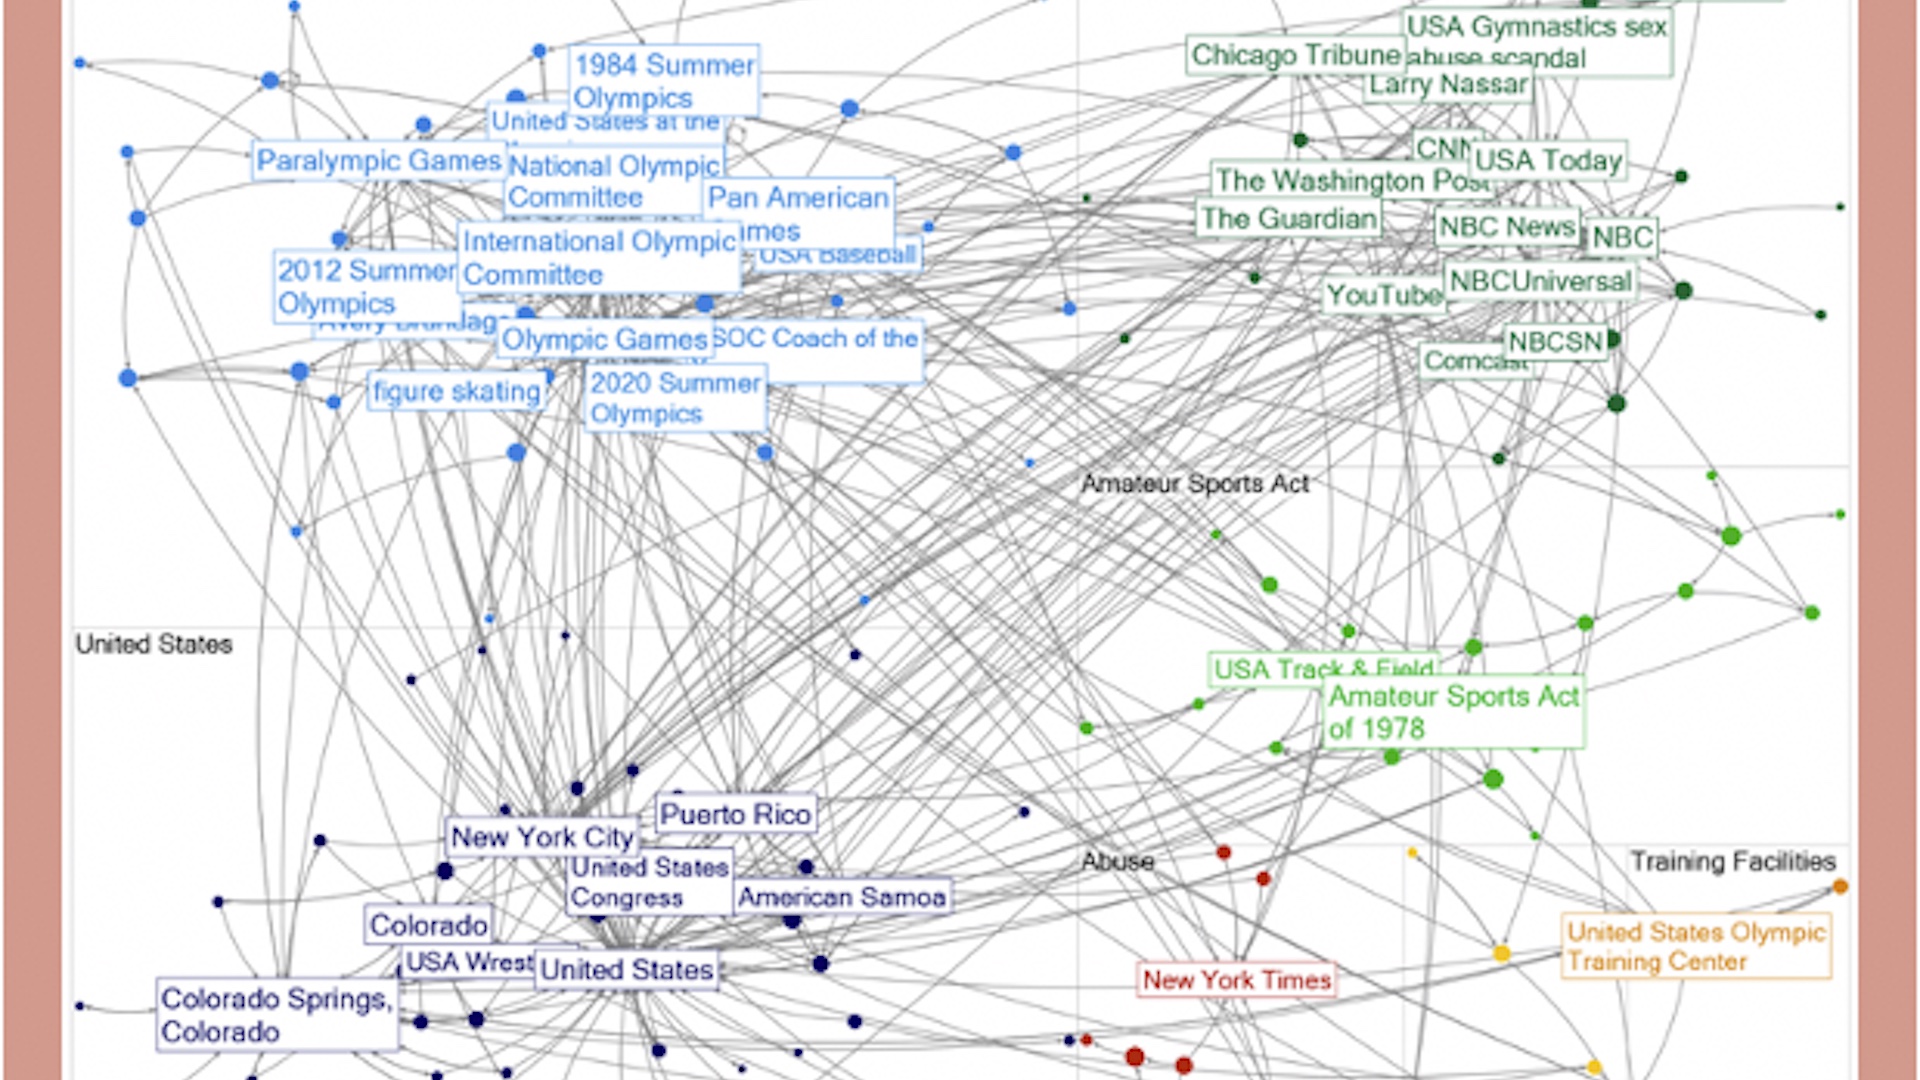 Image that shows Team USA Wikipedia Network Analysis.